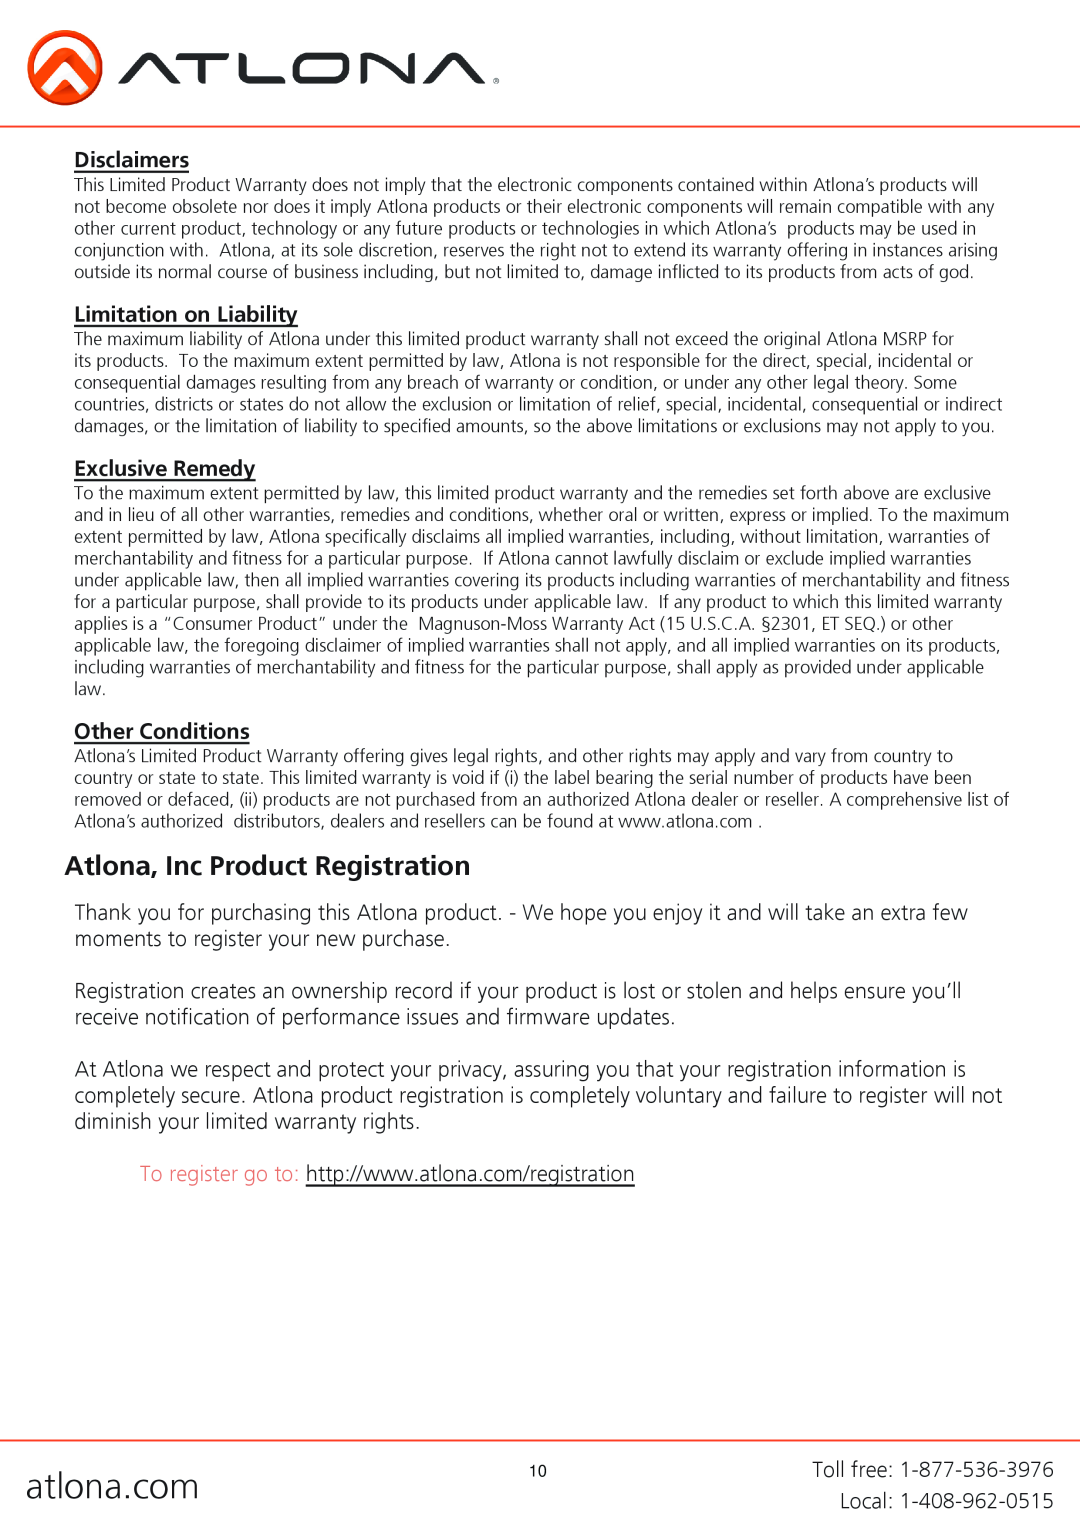 Atlona AT-PC530 Atlona, Inc Product Registration, Disclaimers, Limitation on Liability, Exclusive Remedy, Other Conditions 